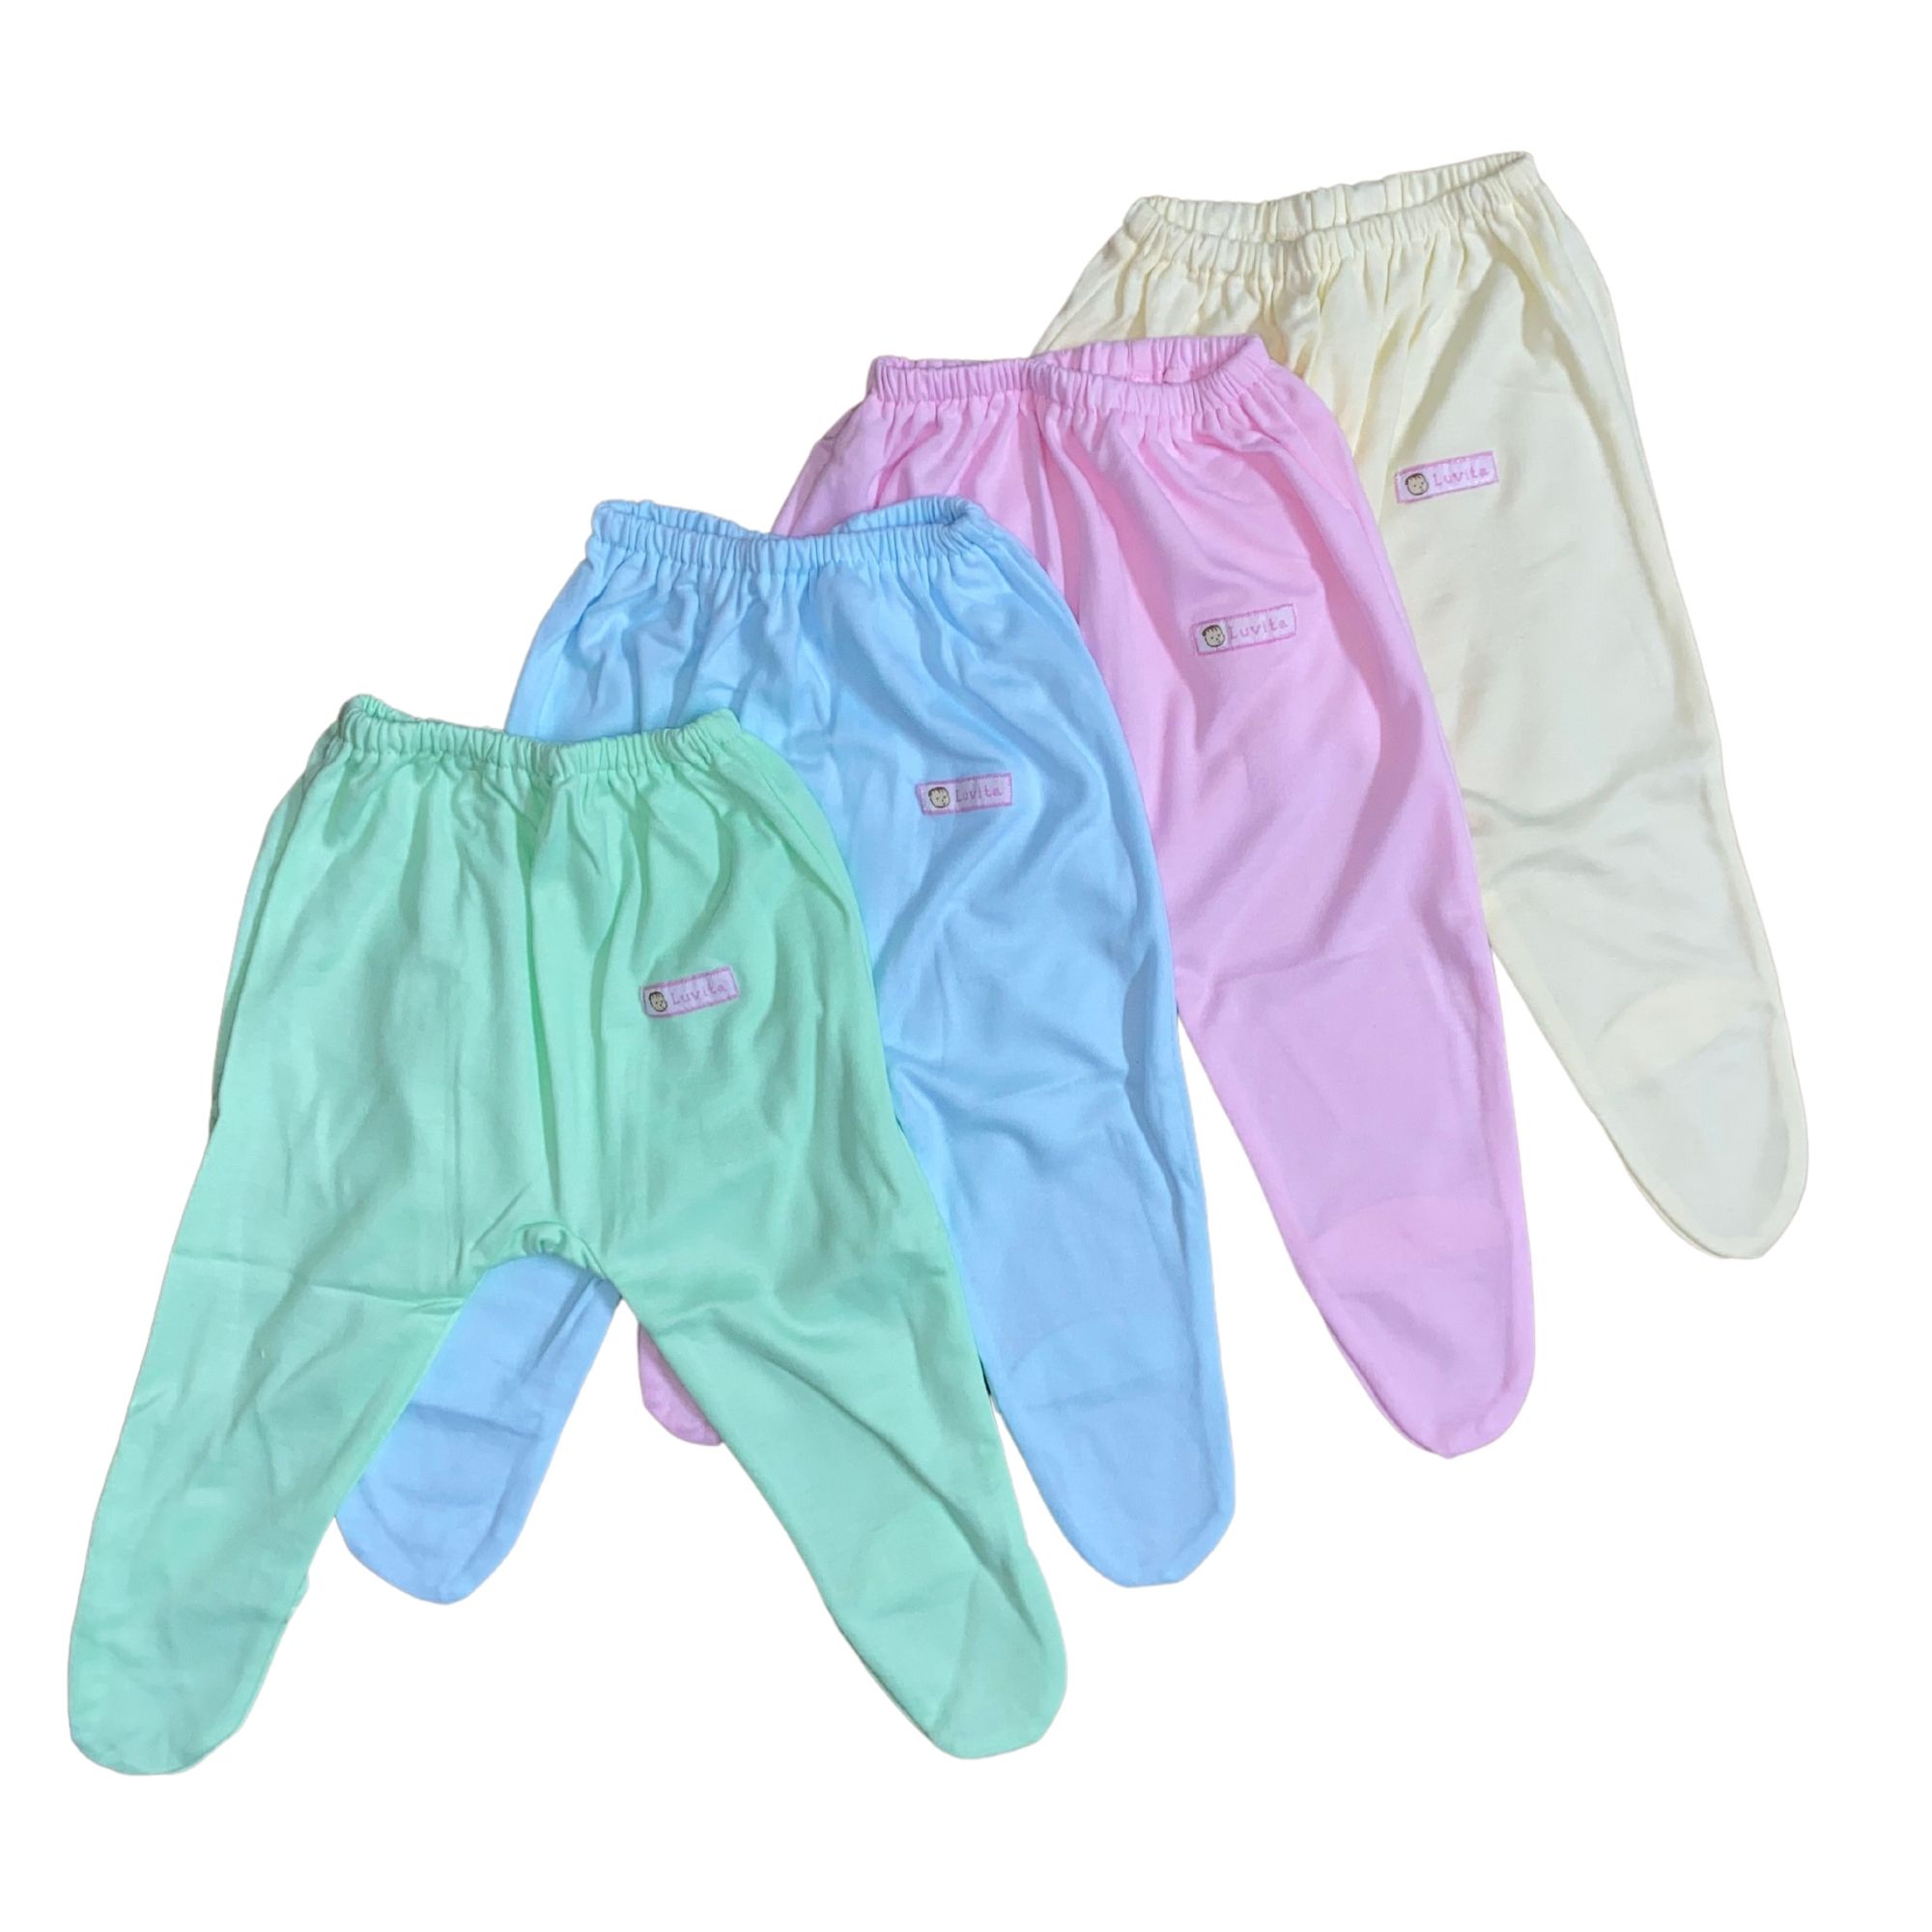 Luvita Covered Toe Long Pants - Mix & Match Buy 2 for $12